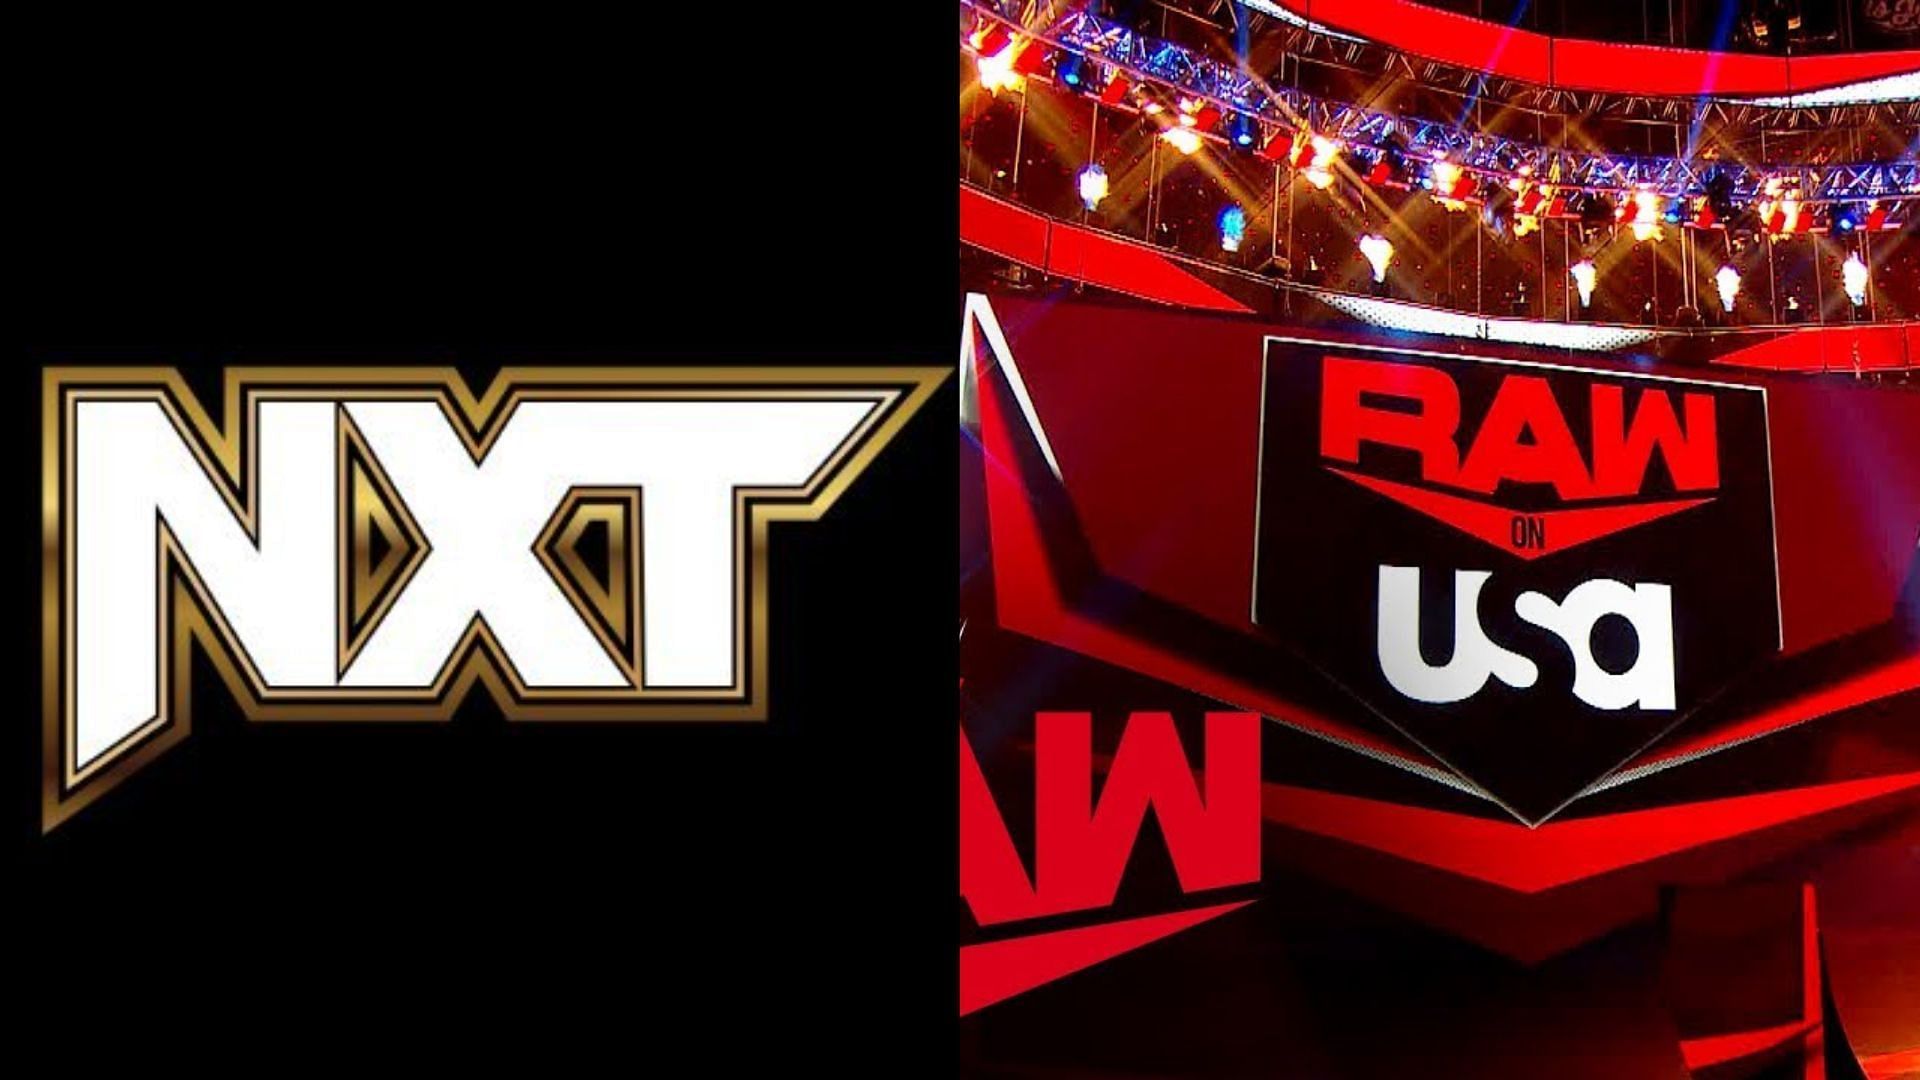 We saw NXT stars make their main roster debut on RAW this week